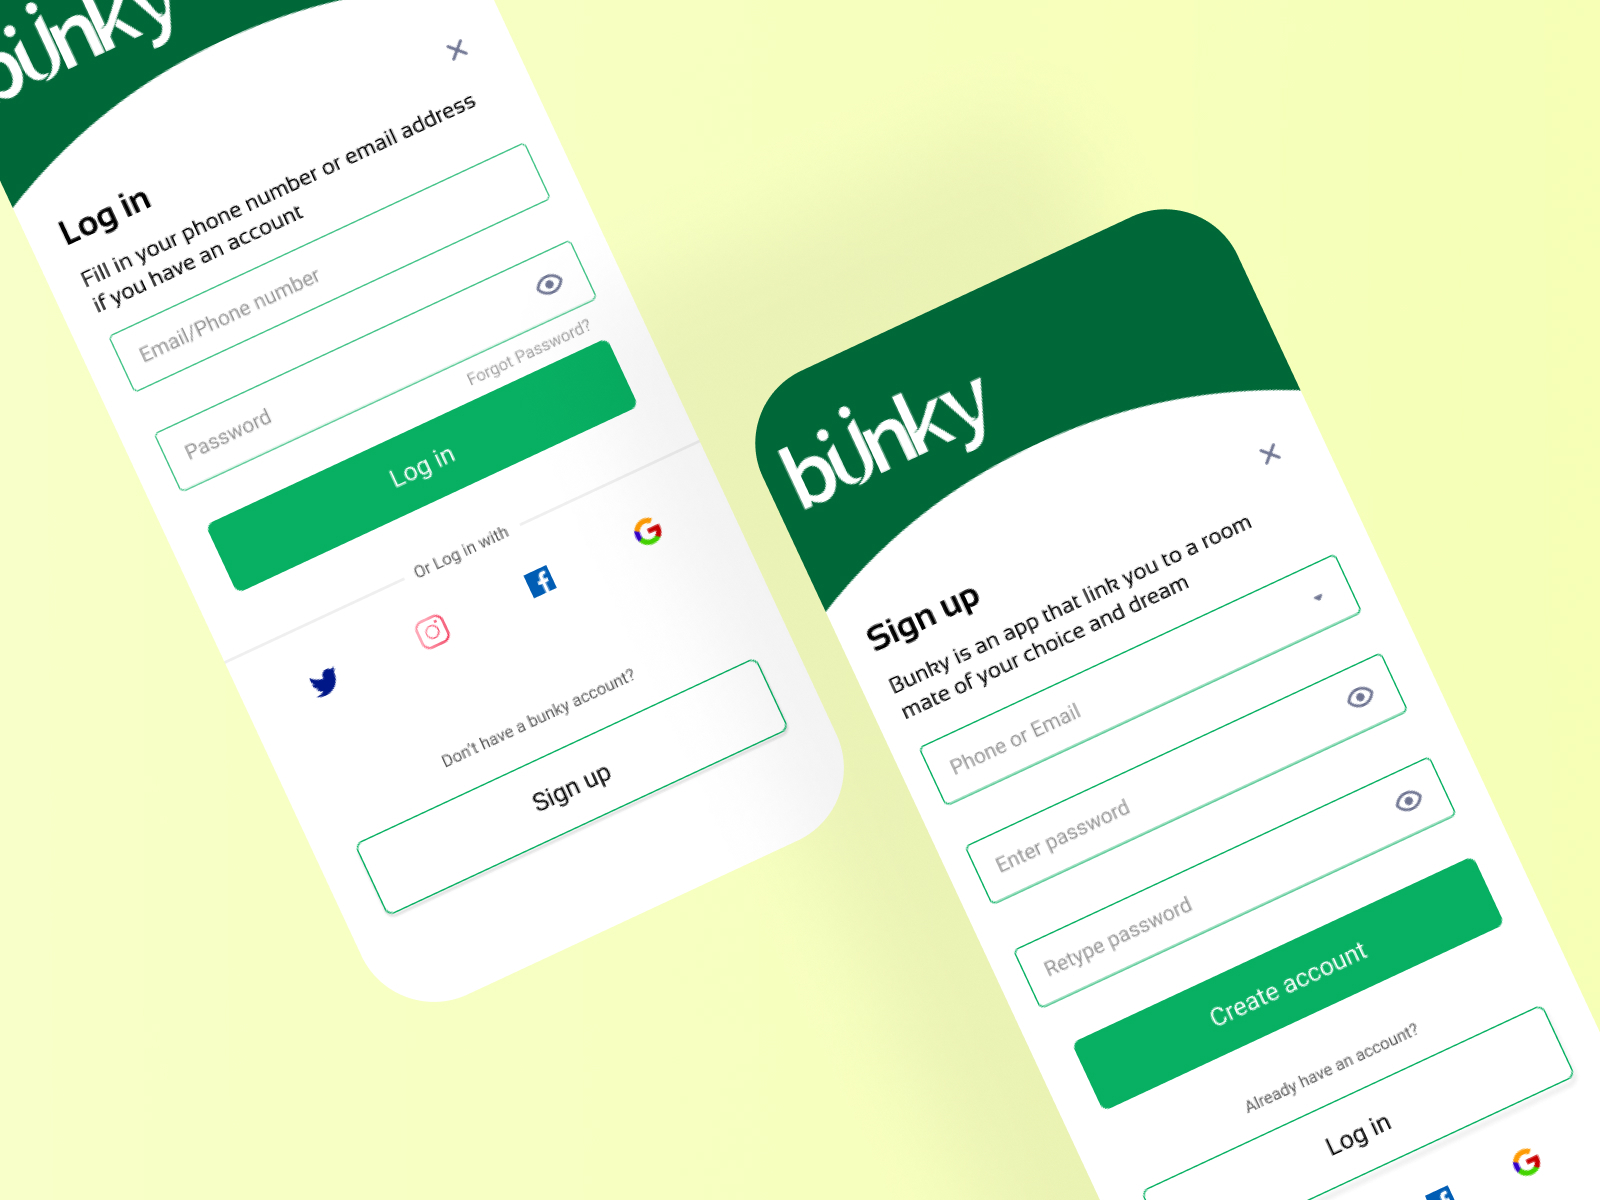 sign up/log in page for bunky by Akpuruku Godstime on Dribbble